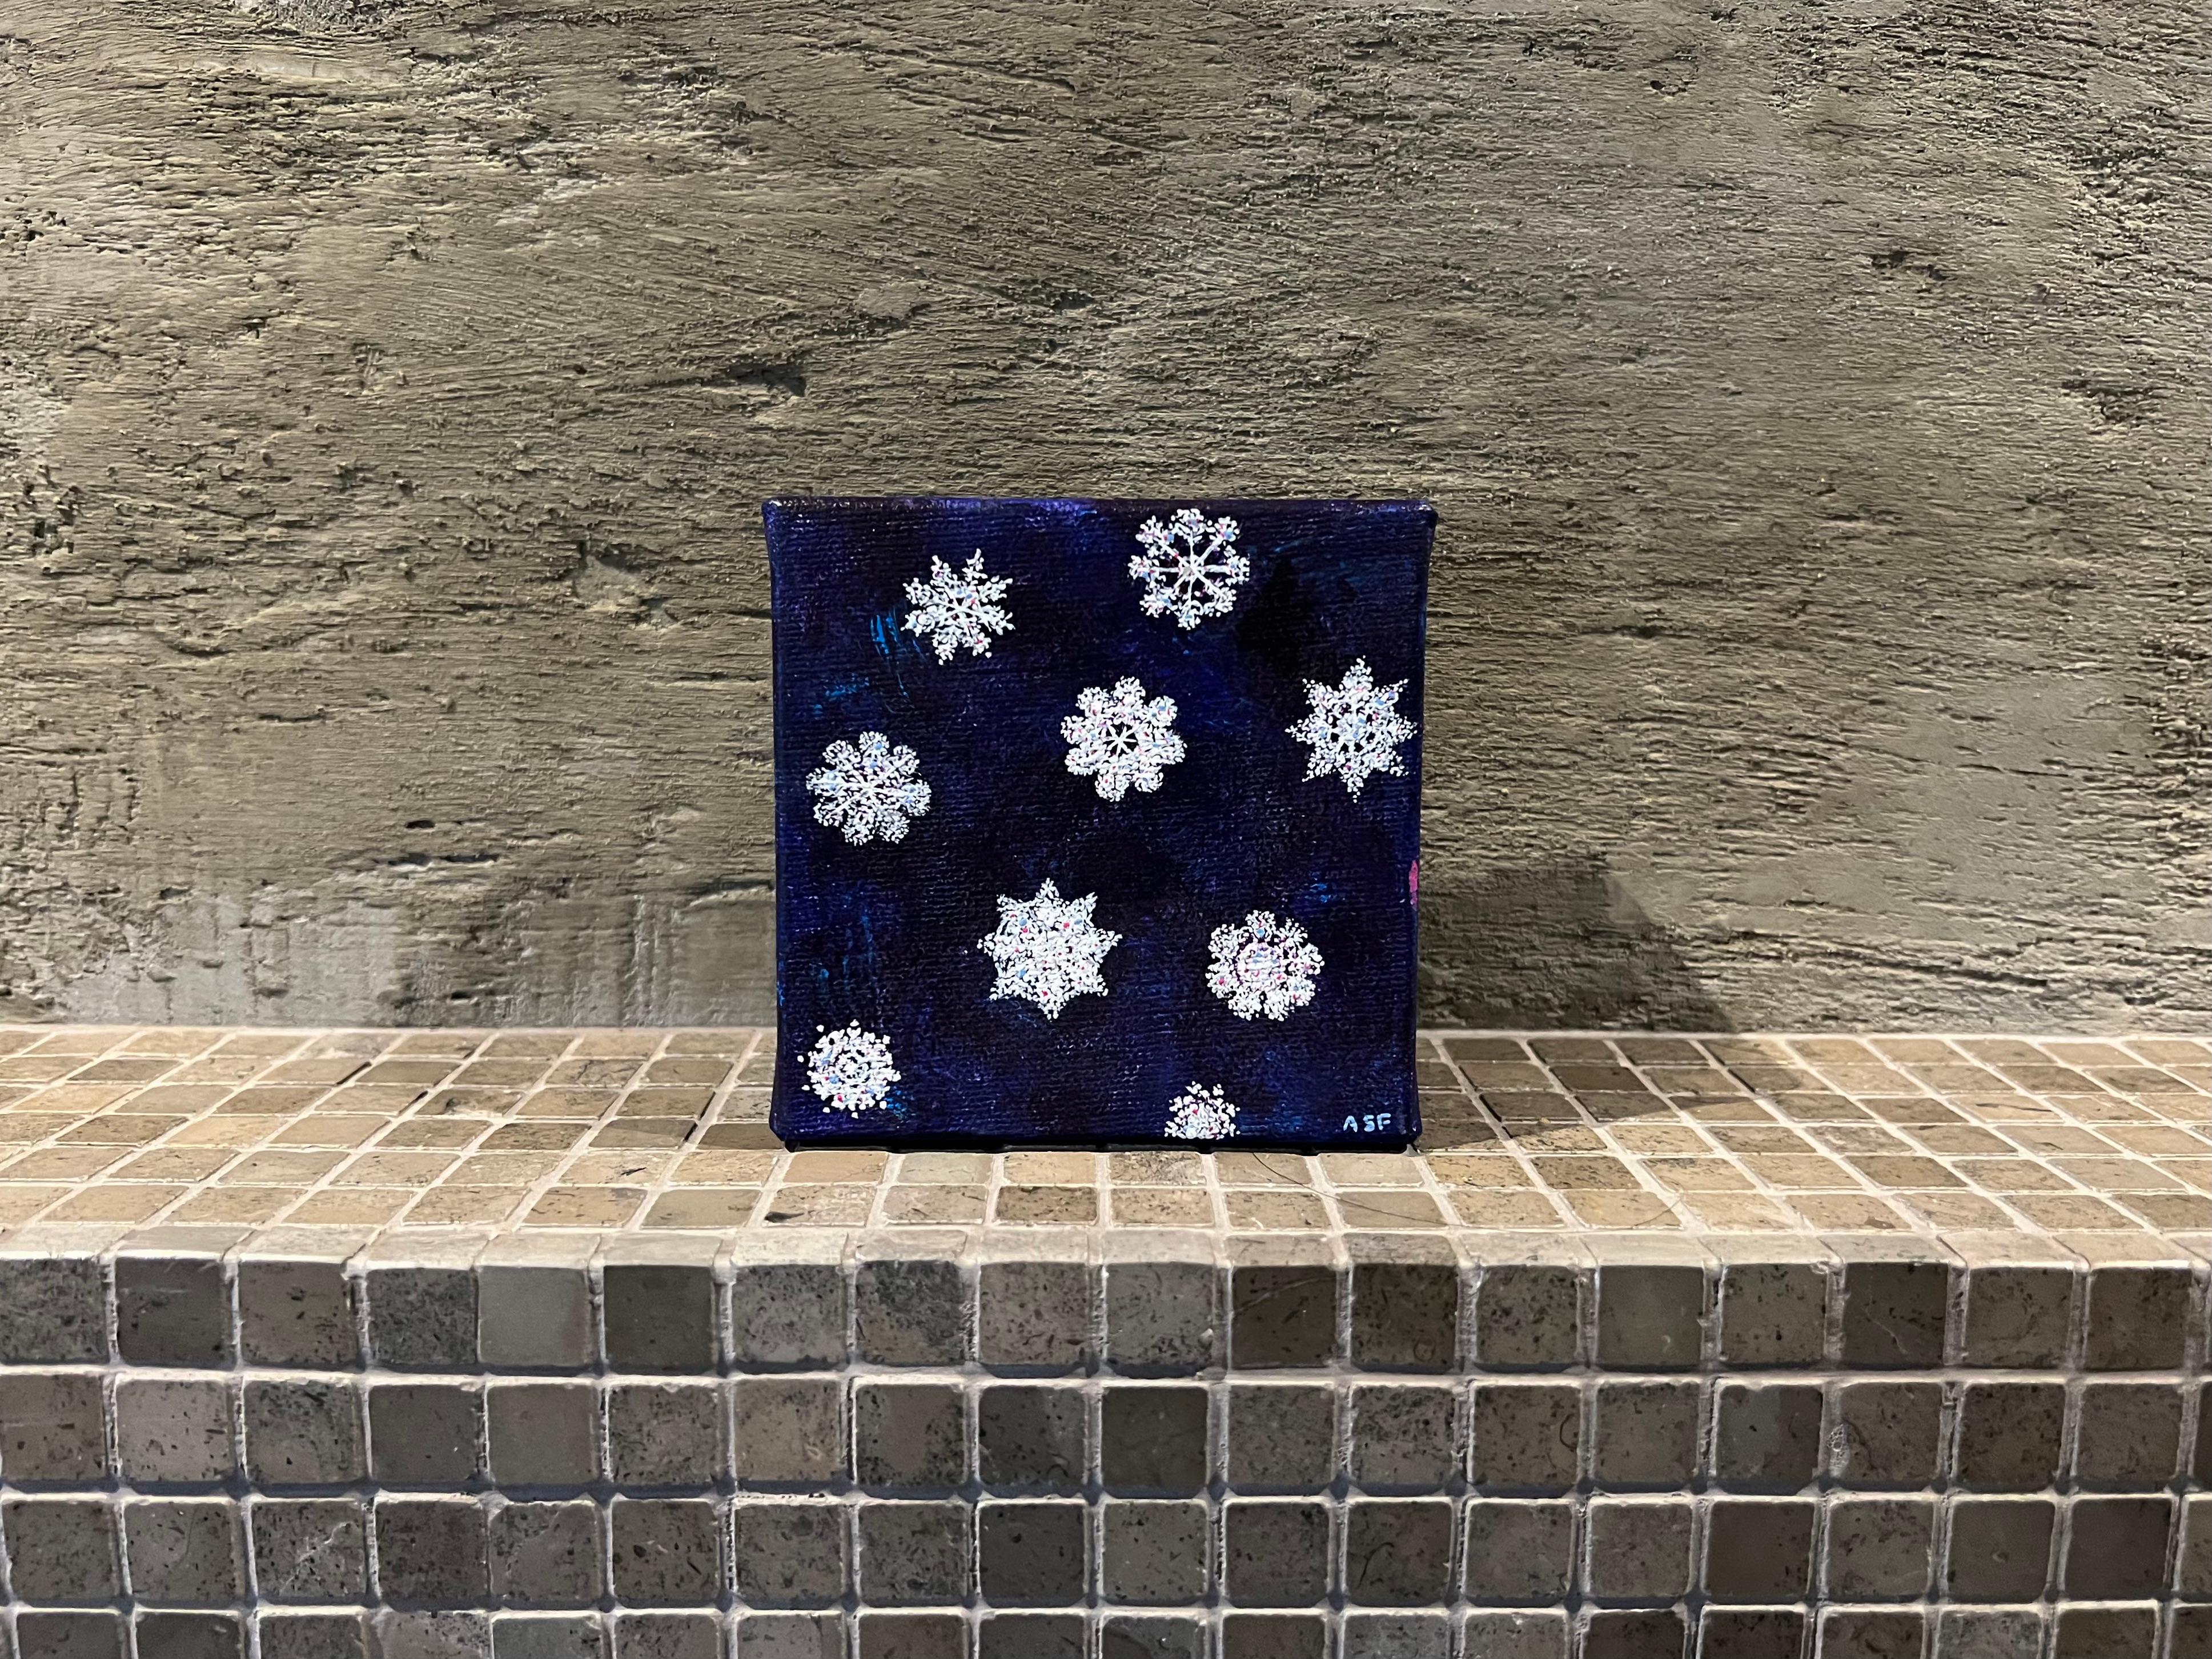 Snowflakes - lll (4"x4", Blue, White, Winter, Snow, Christmas, Small Painting)